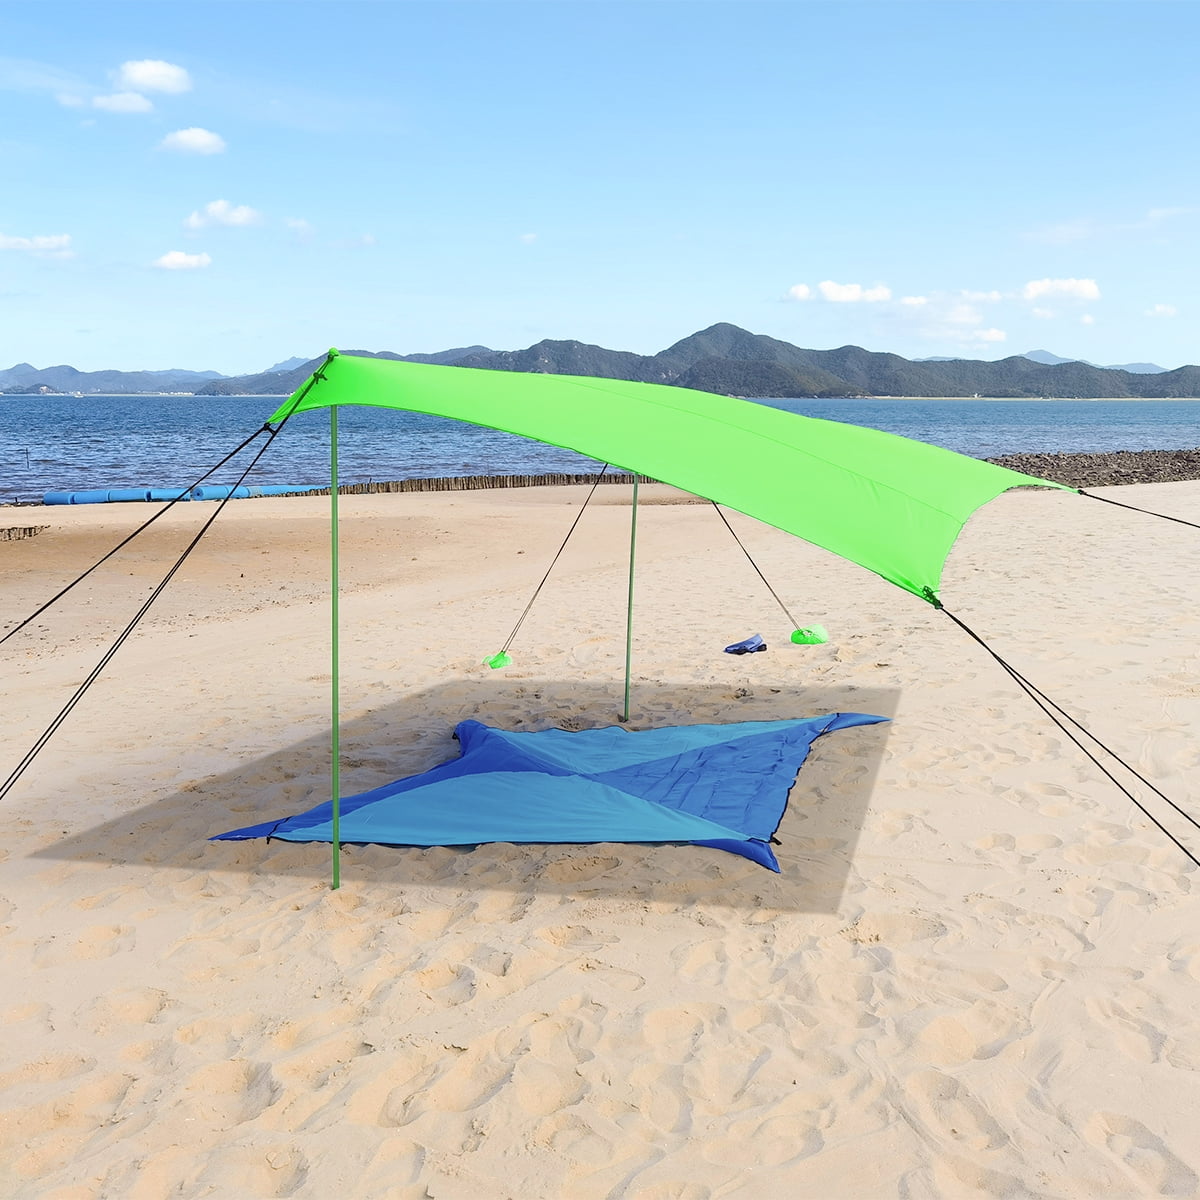 Parks Sun Shelter for Beach Details about   Beach Sunshade Tent UPF50 Camping & Outdoors 